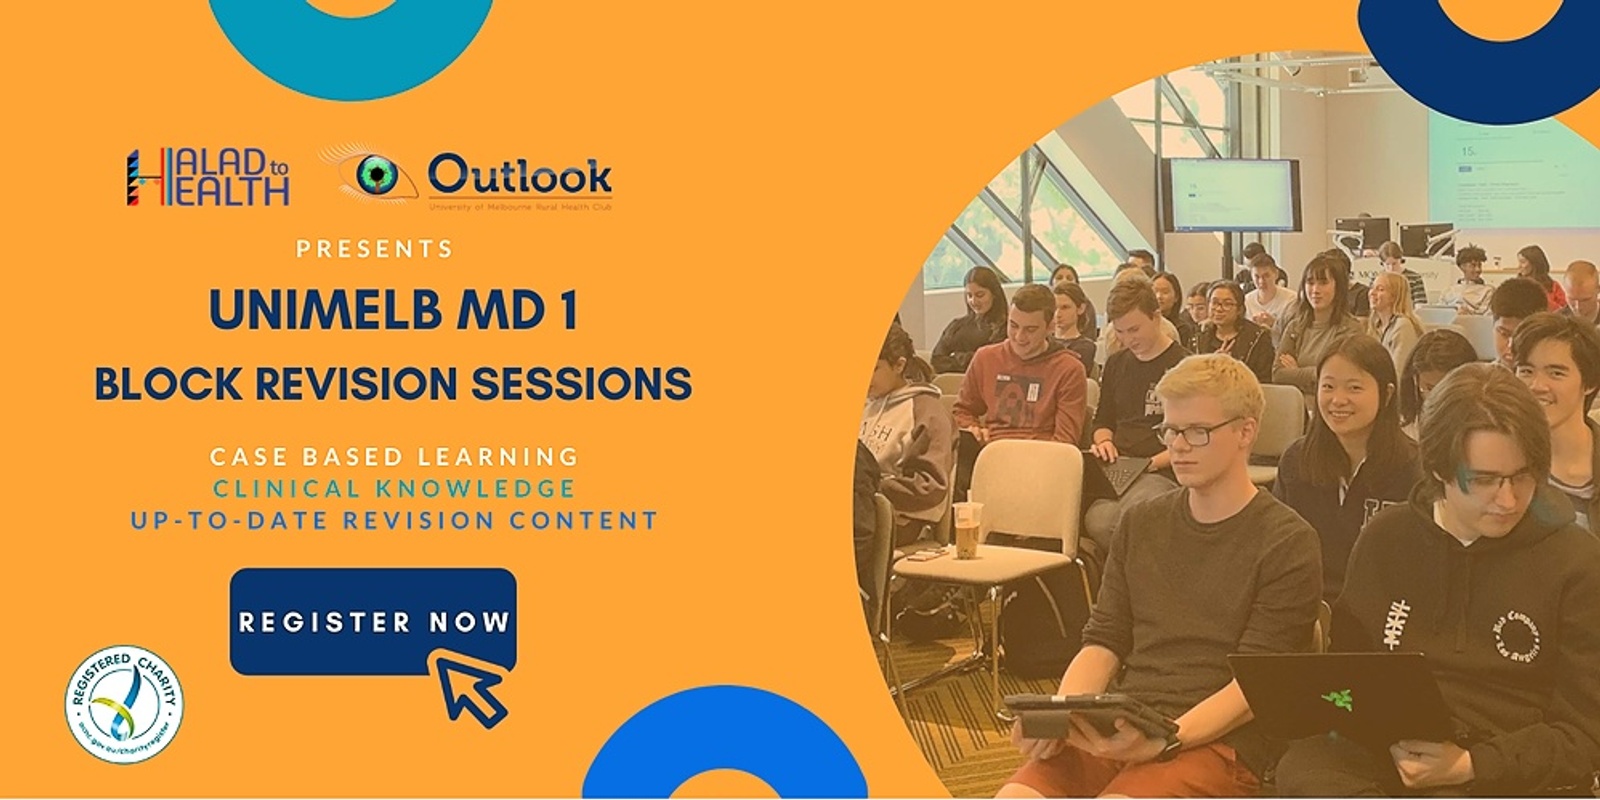 🎓UniMelb MD 1 Block Revision Sessions | Halad to Health X Outlook Rural Health Club